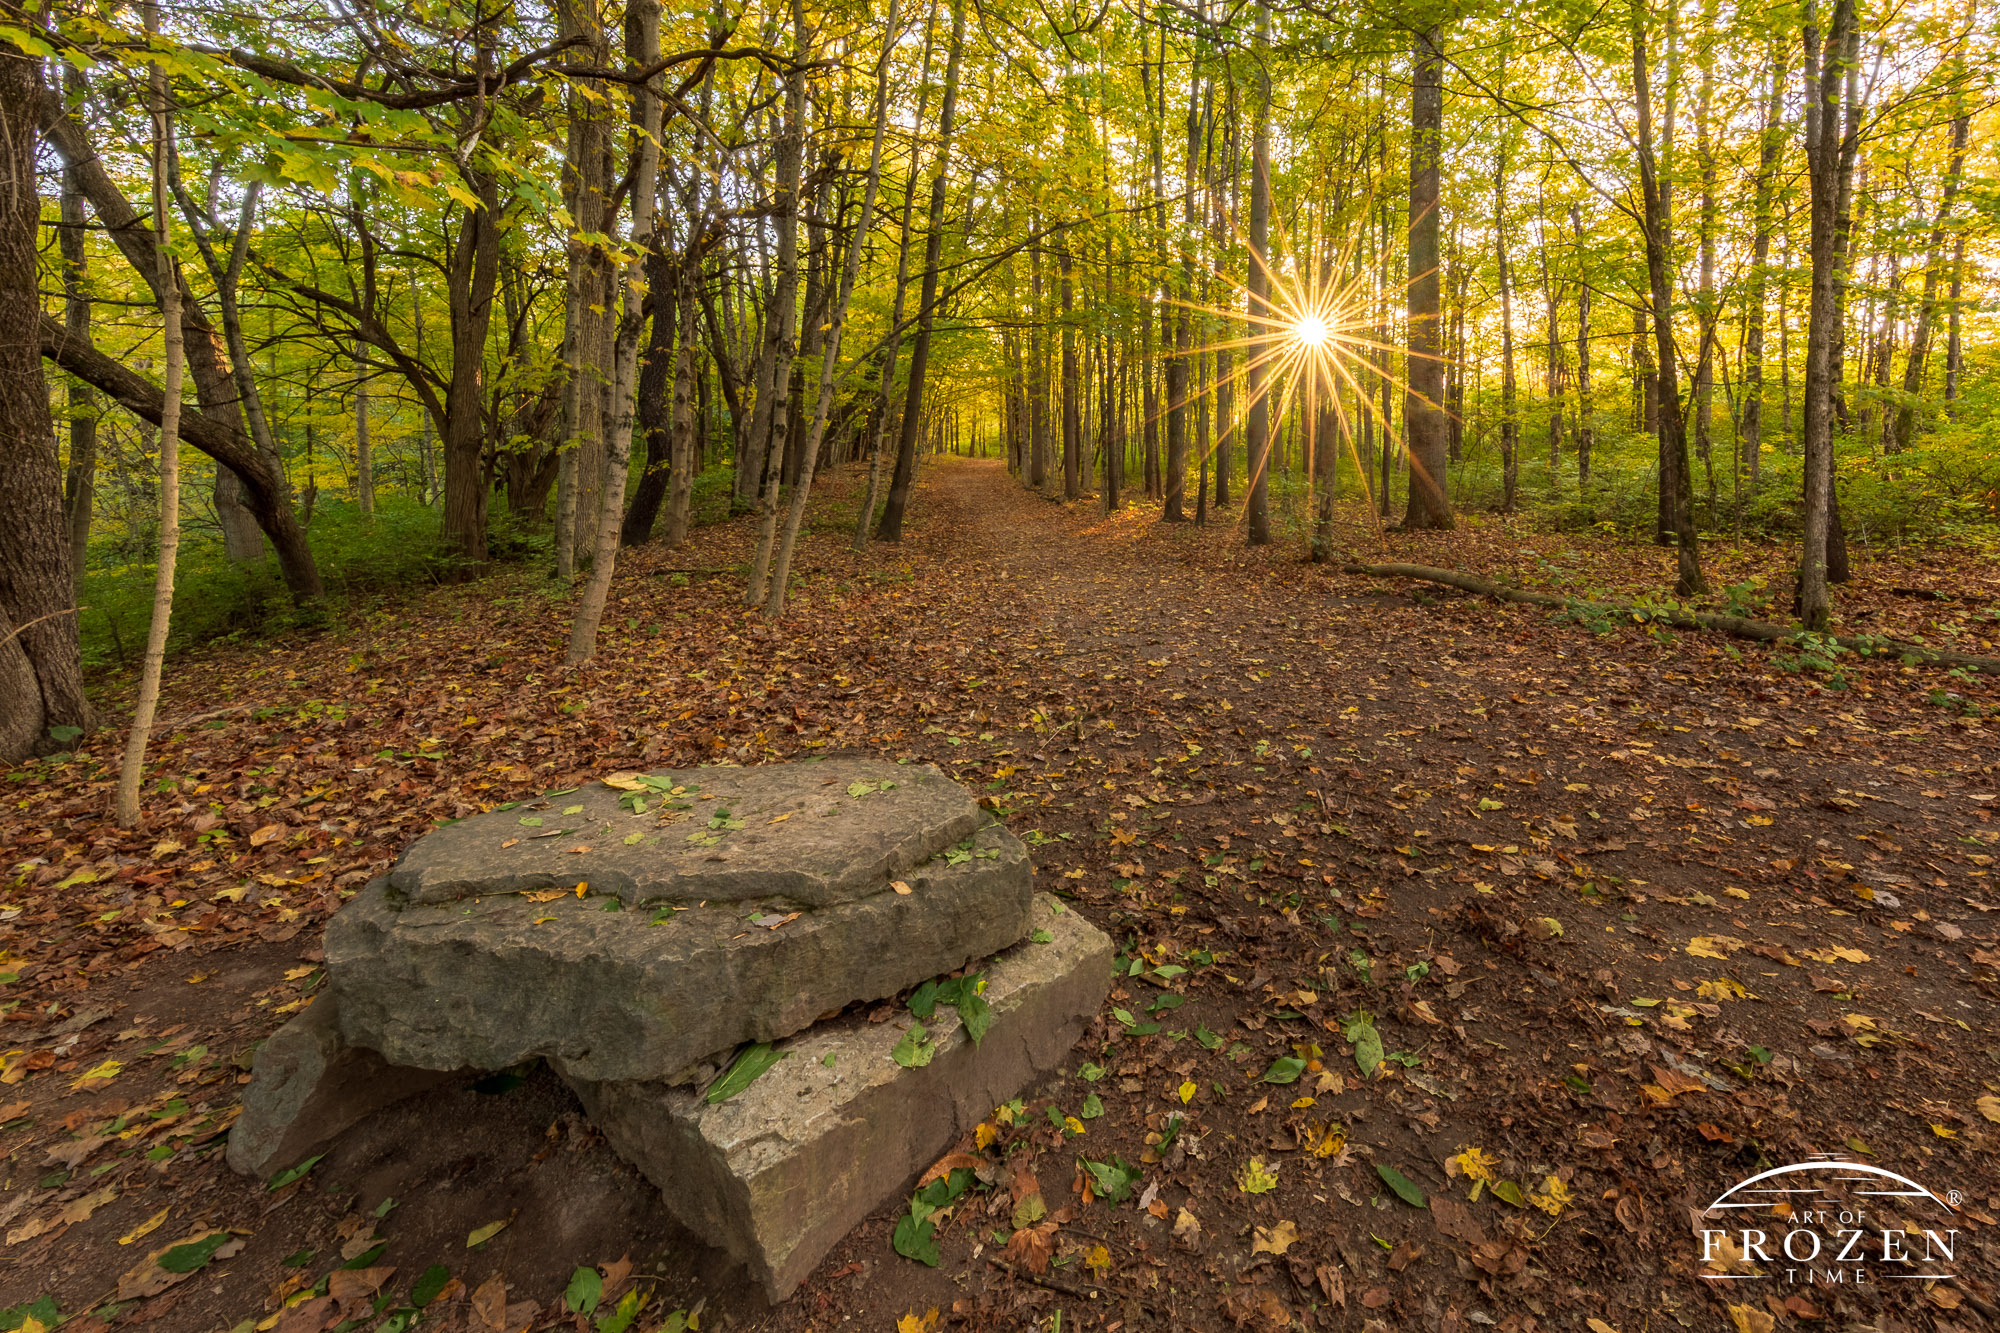 As this hiking trail disappears behind a grove of trees, the setting sun backlights the forest floor and backlights the thinning leaves during this autumn evening